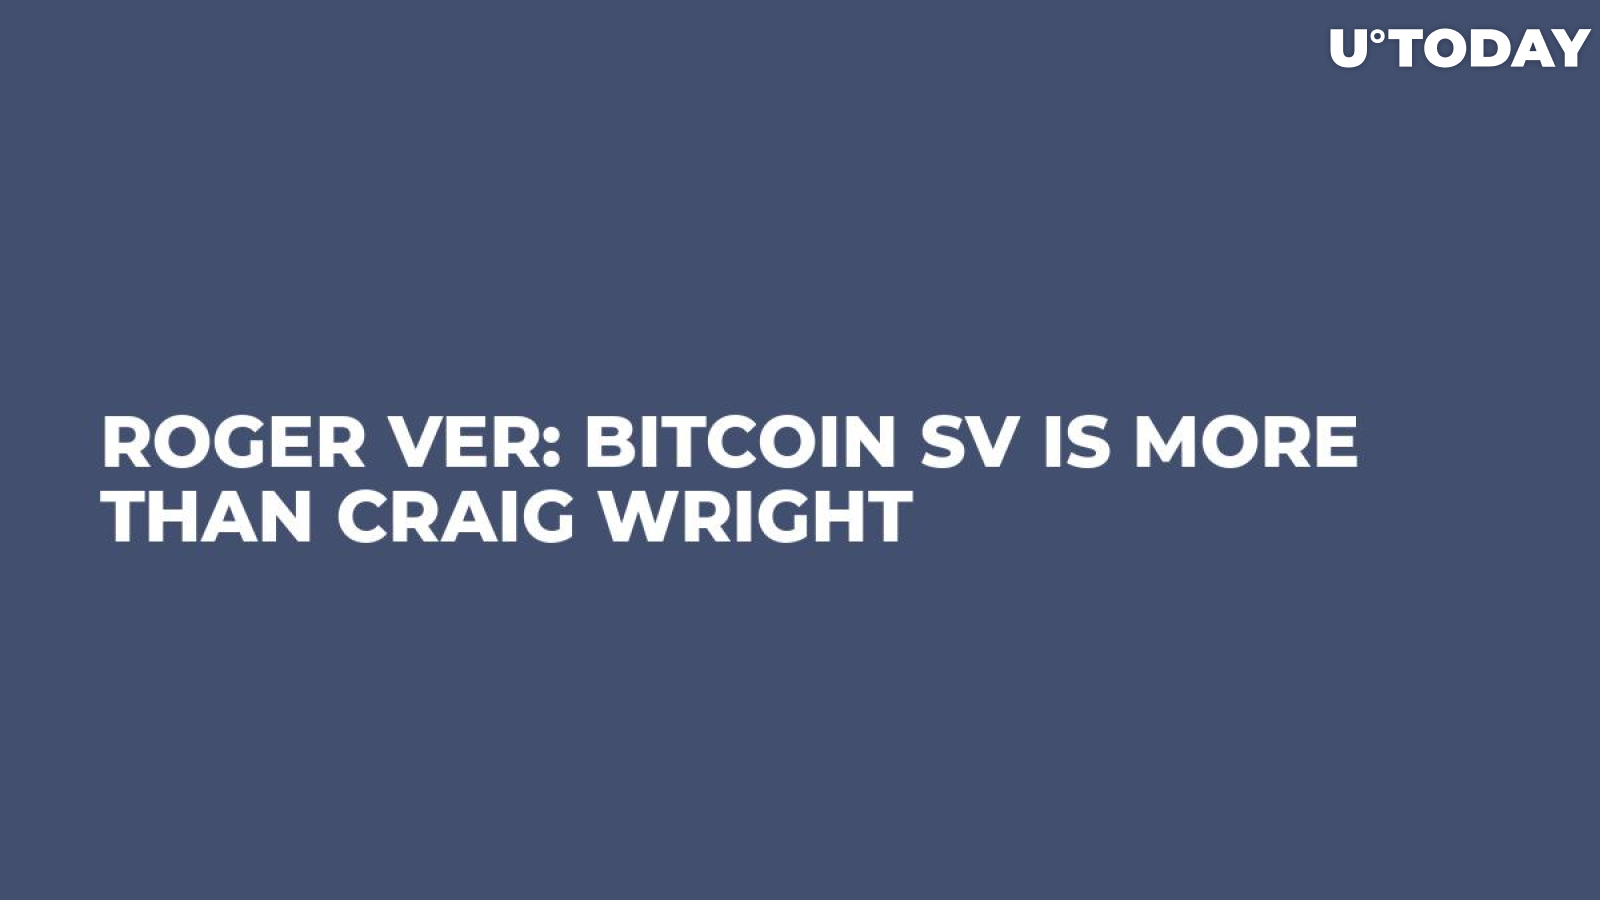 Roger Ver: Bitcoin SV Is More Than Craig Wright